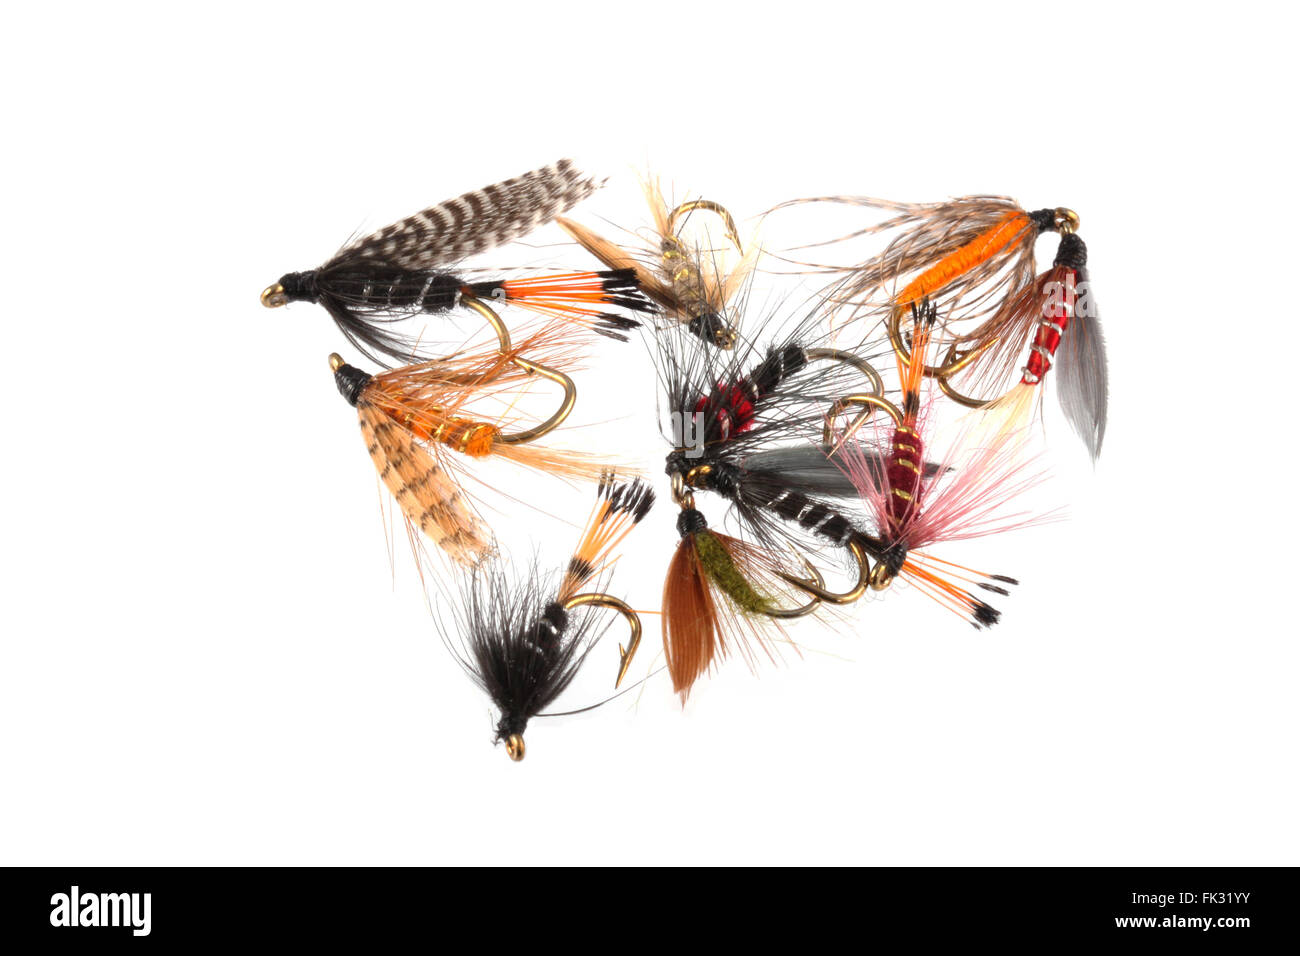 Handmade flies used by fishermen to attract trout and salmon by game fishermen. Stock Photo